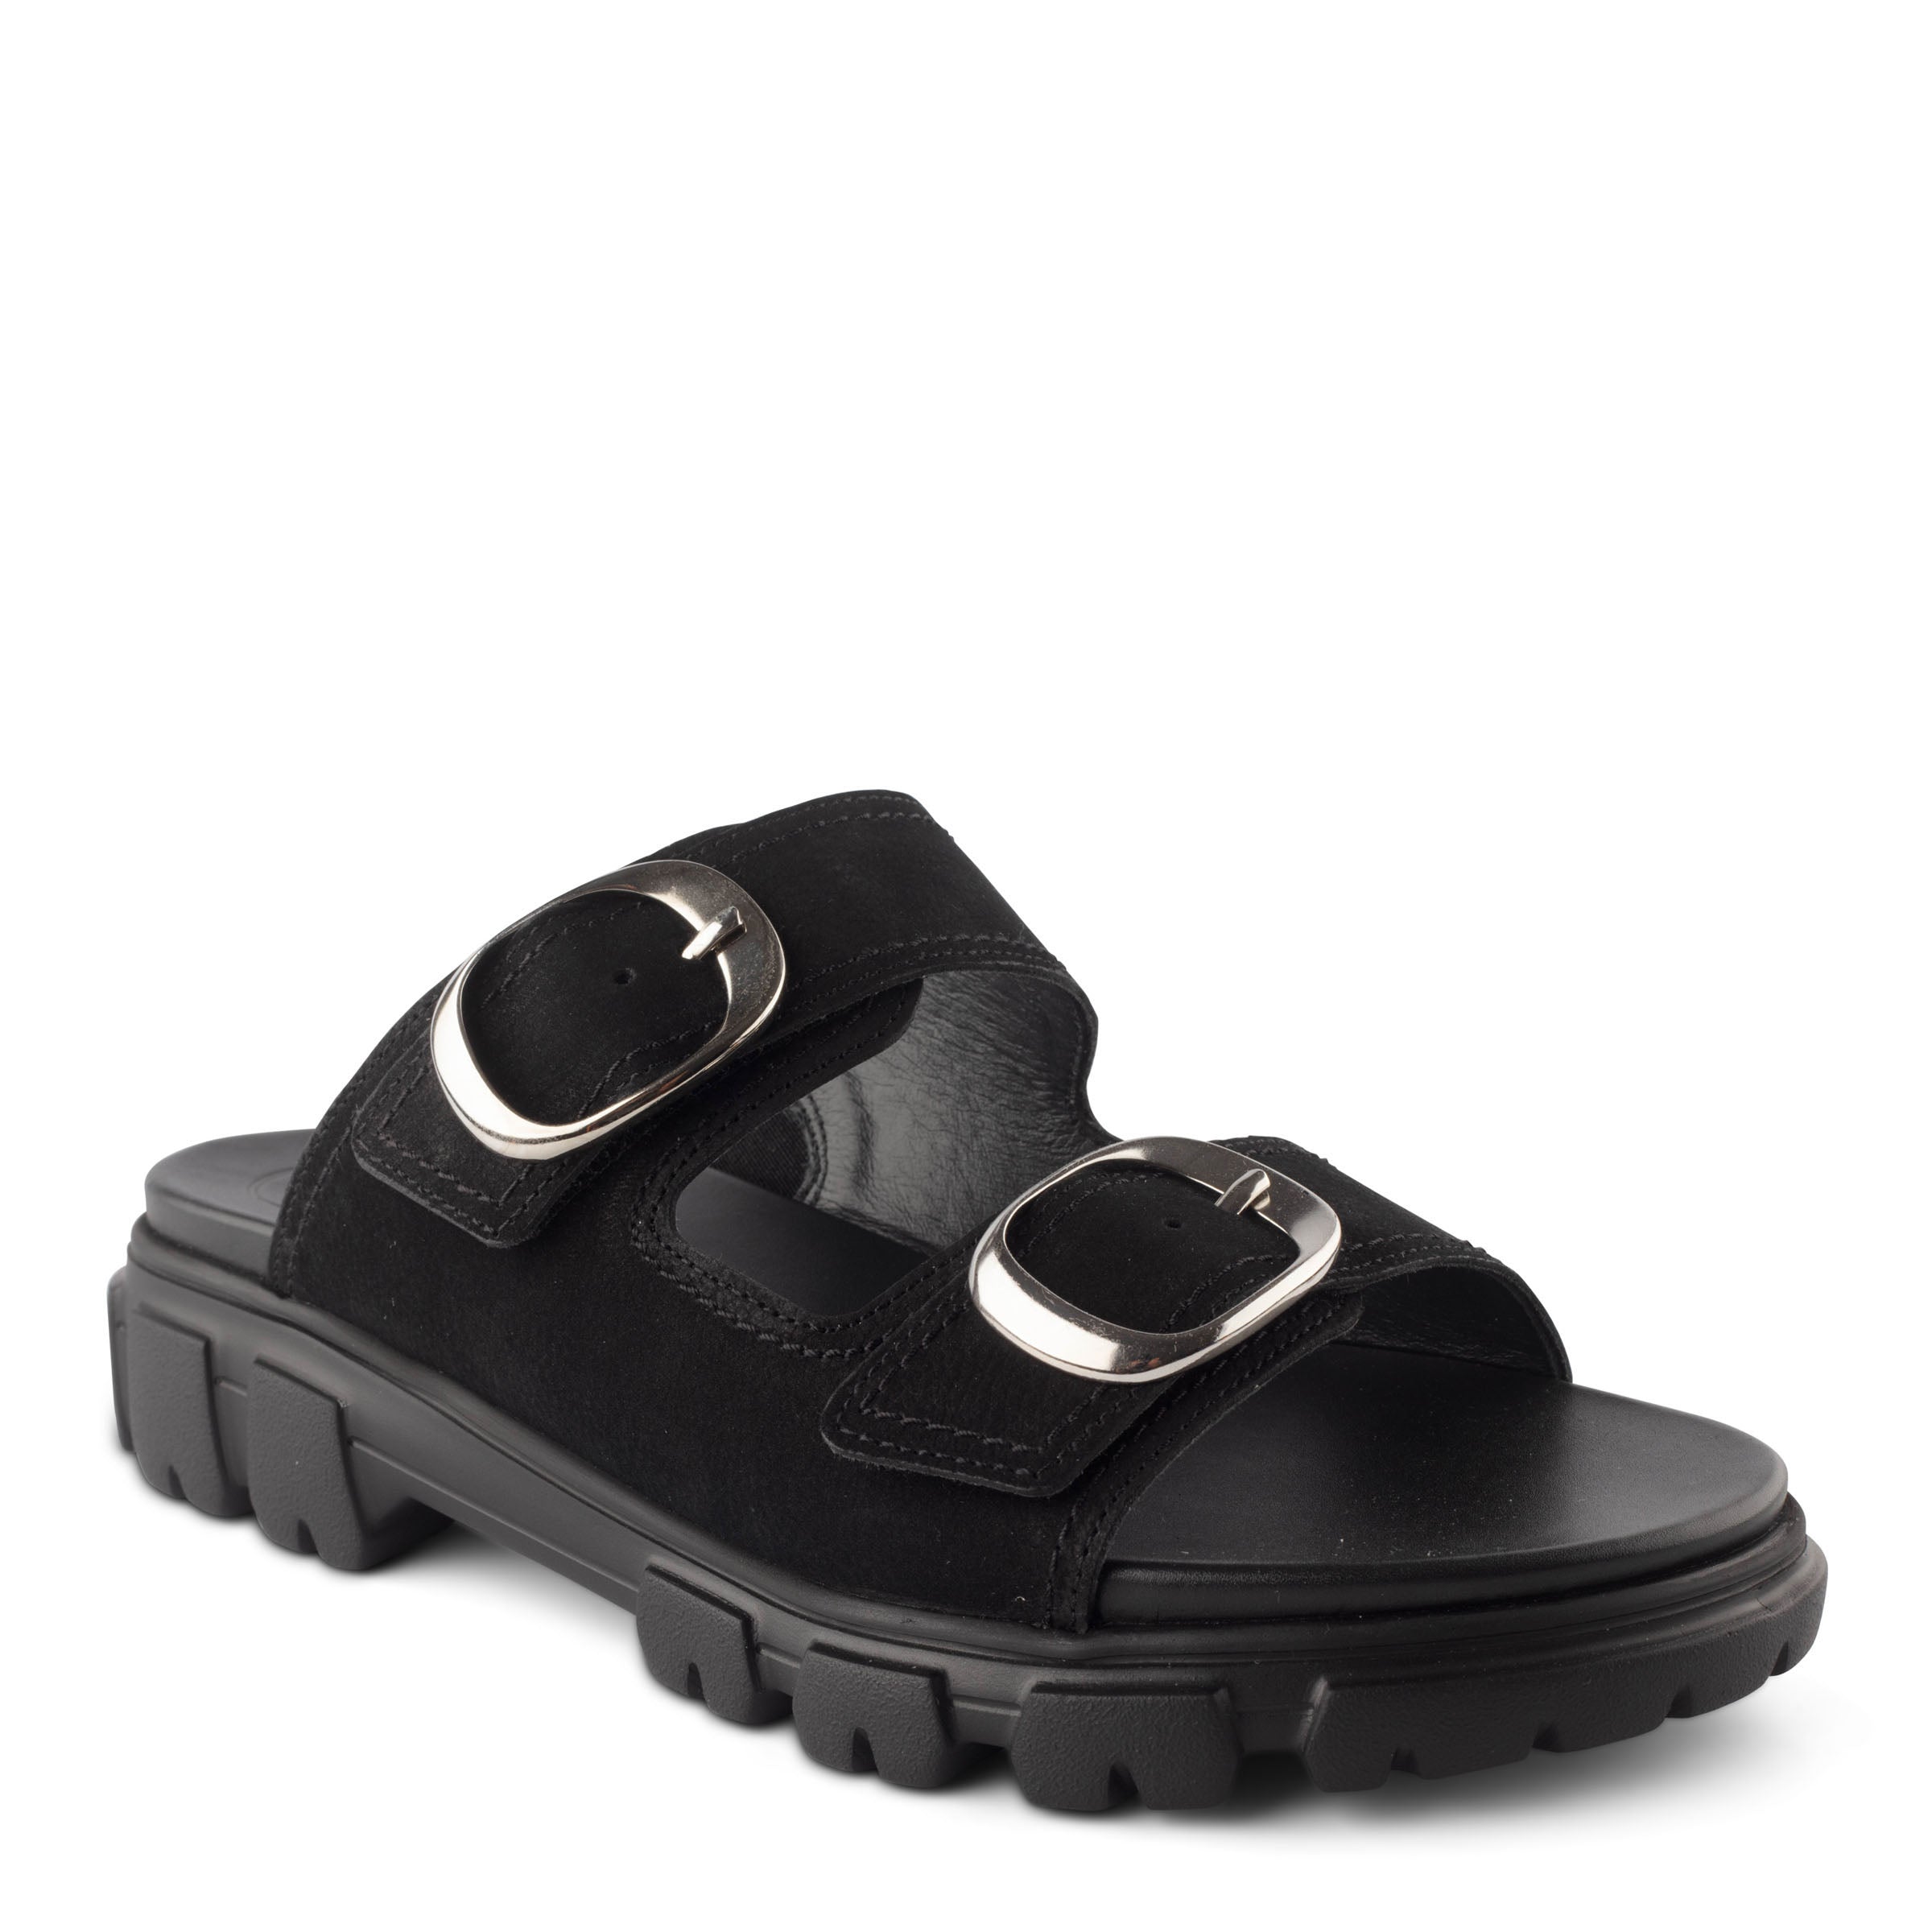 Women's Marina Sandals with Arch Support & Paul Green Shoes